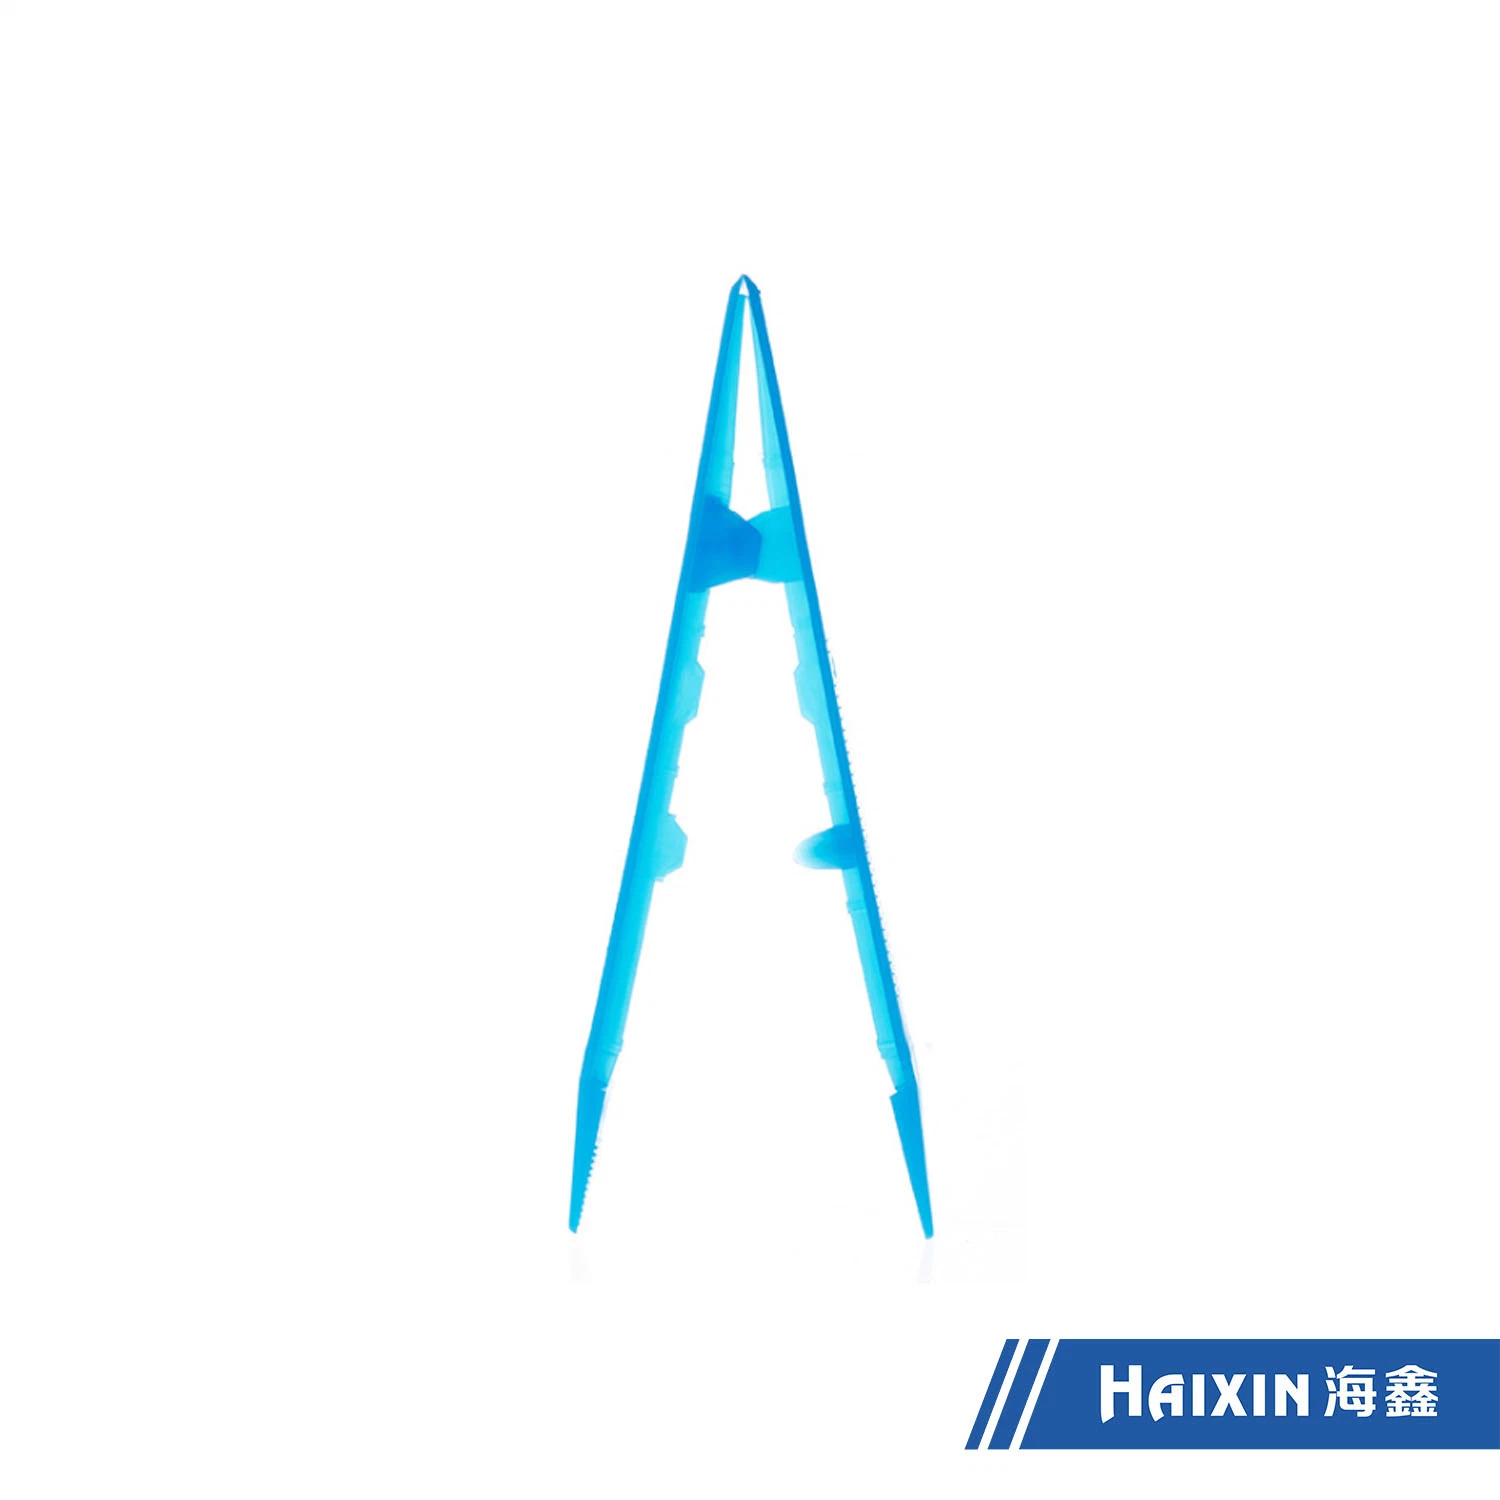 Customized PE PP ABS Plastic Product Medical Disposable Emergency Forceps